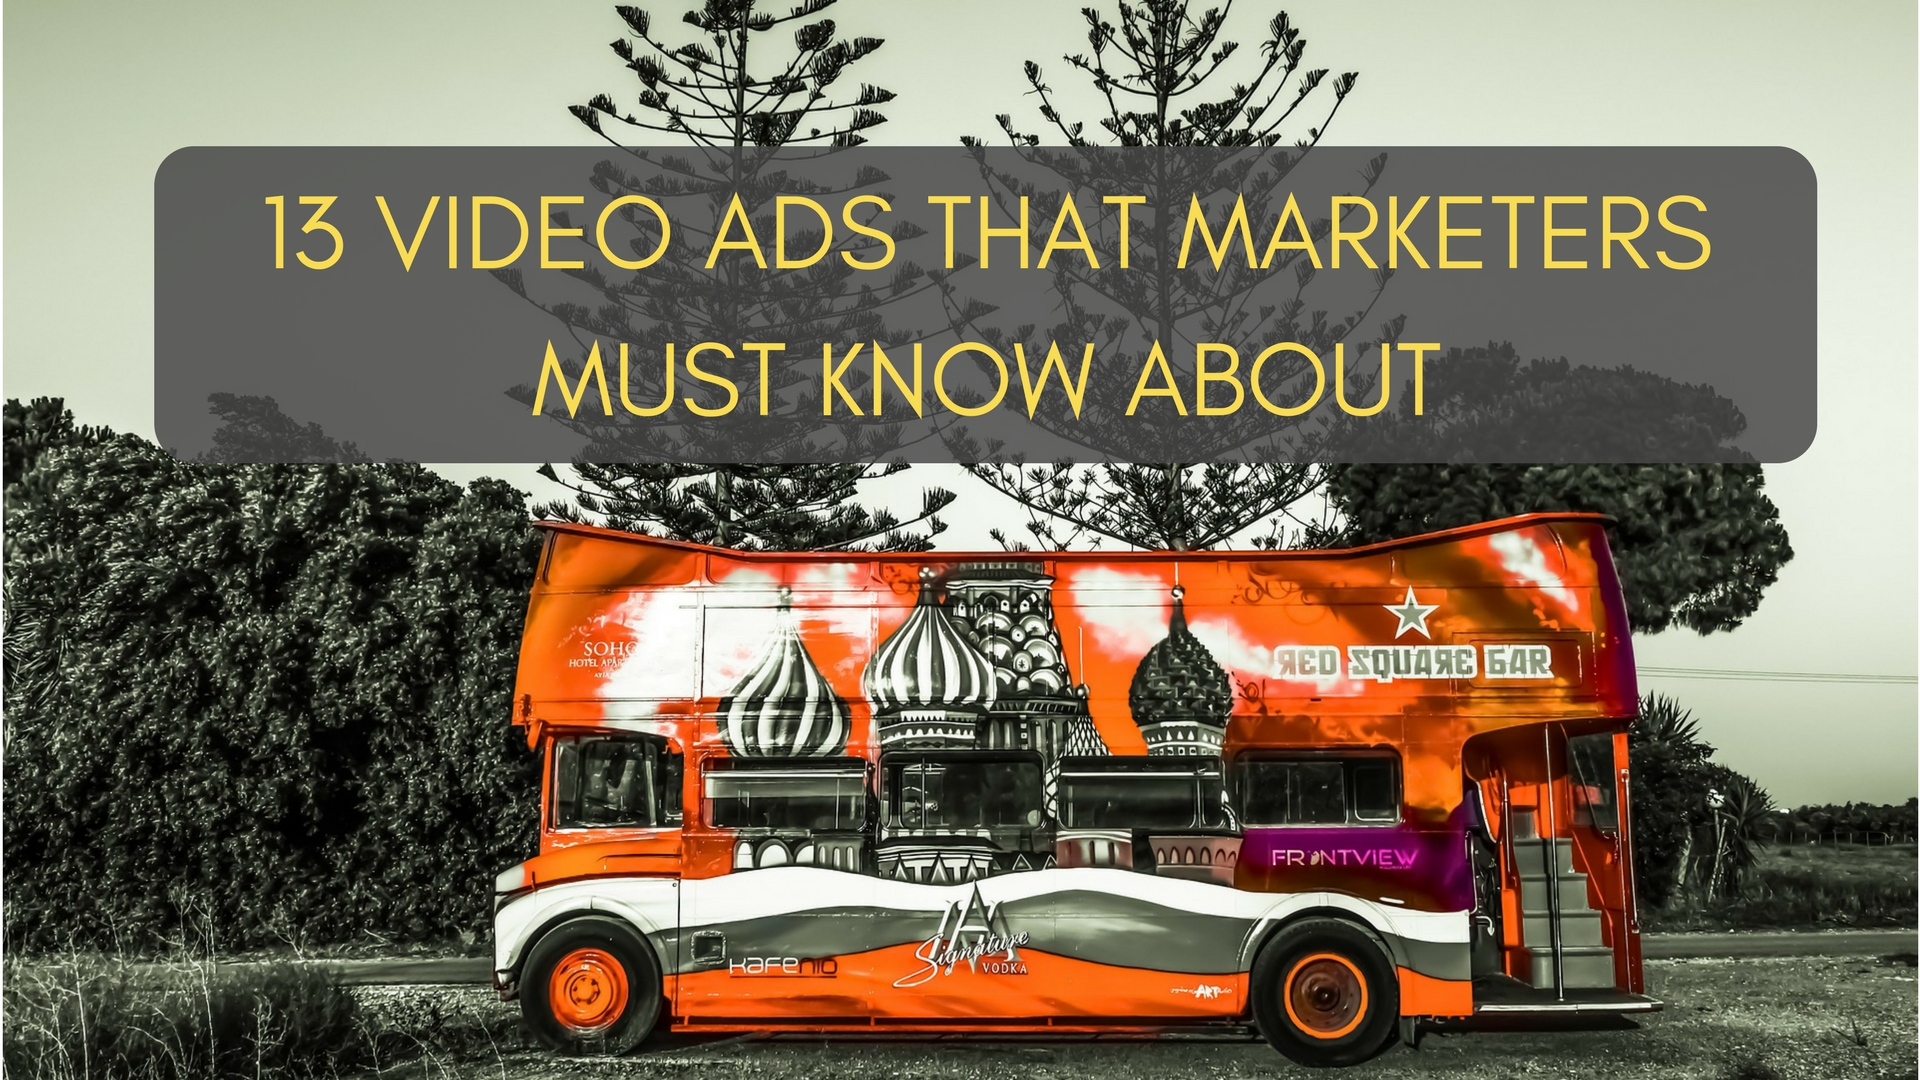 Xxx Vdio Dog And Yong Garl Hindi - 13 Video Ads that Marketers Must Know About